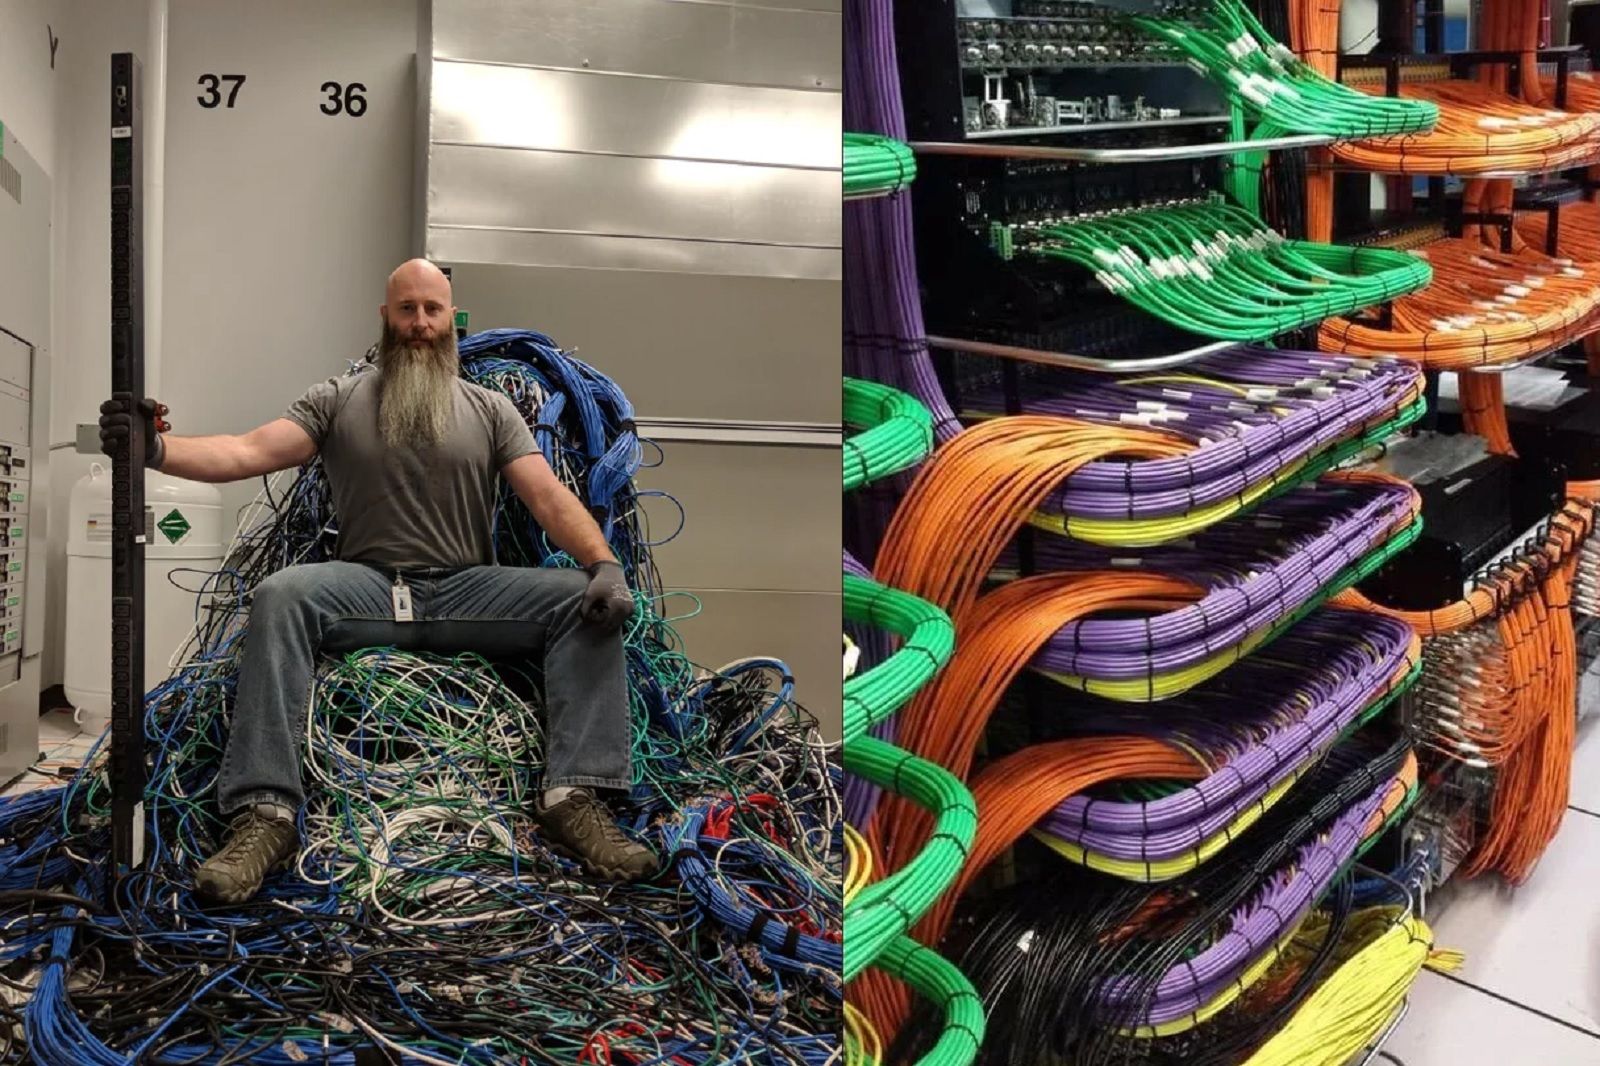 60 insanely neat photos of cables that belong in a modern art gallery